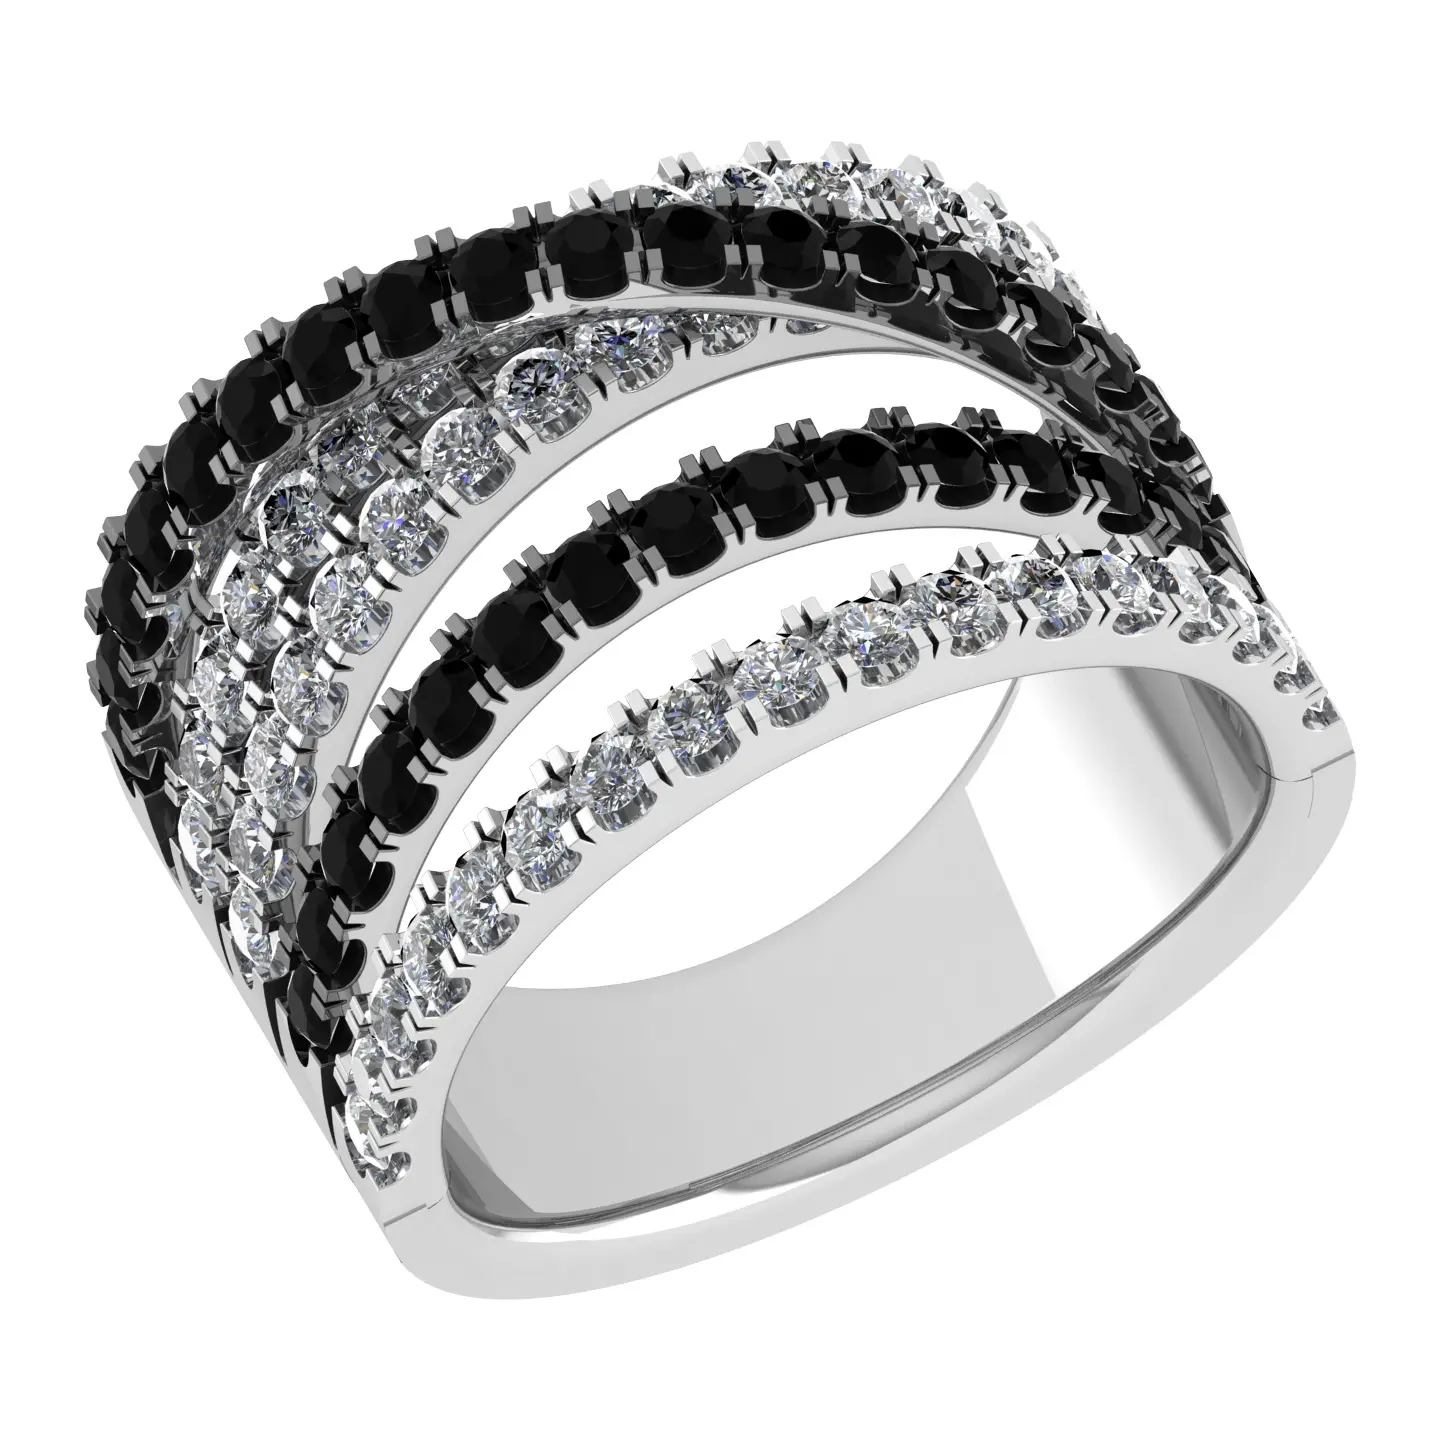 0.66 carat black treated diamond 1 carat white natural diamond 18kt pure gold band style ring New fashion for wedding band